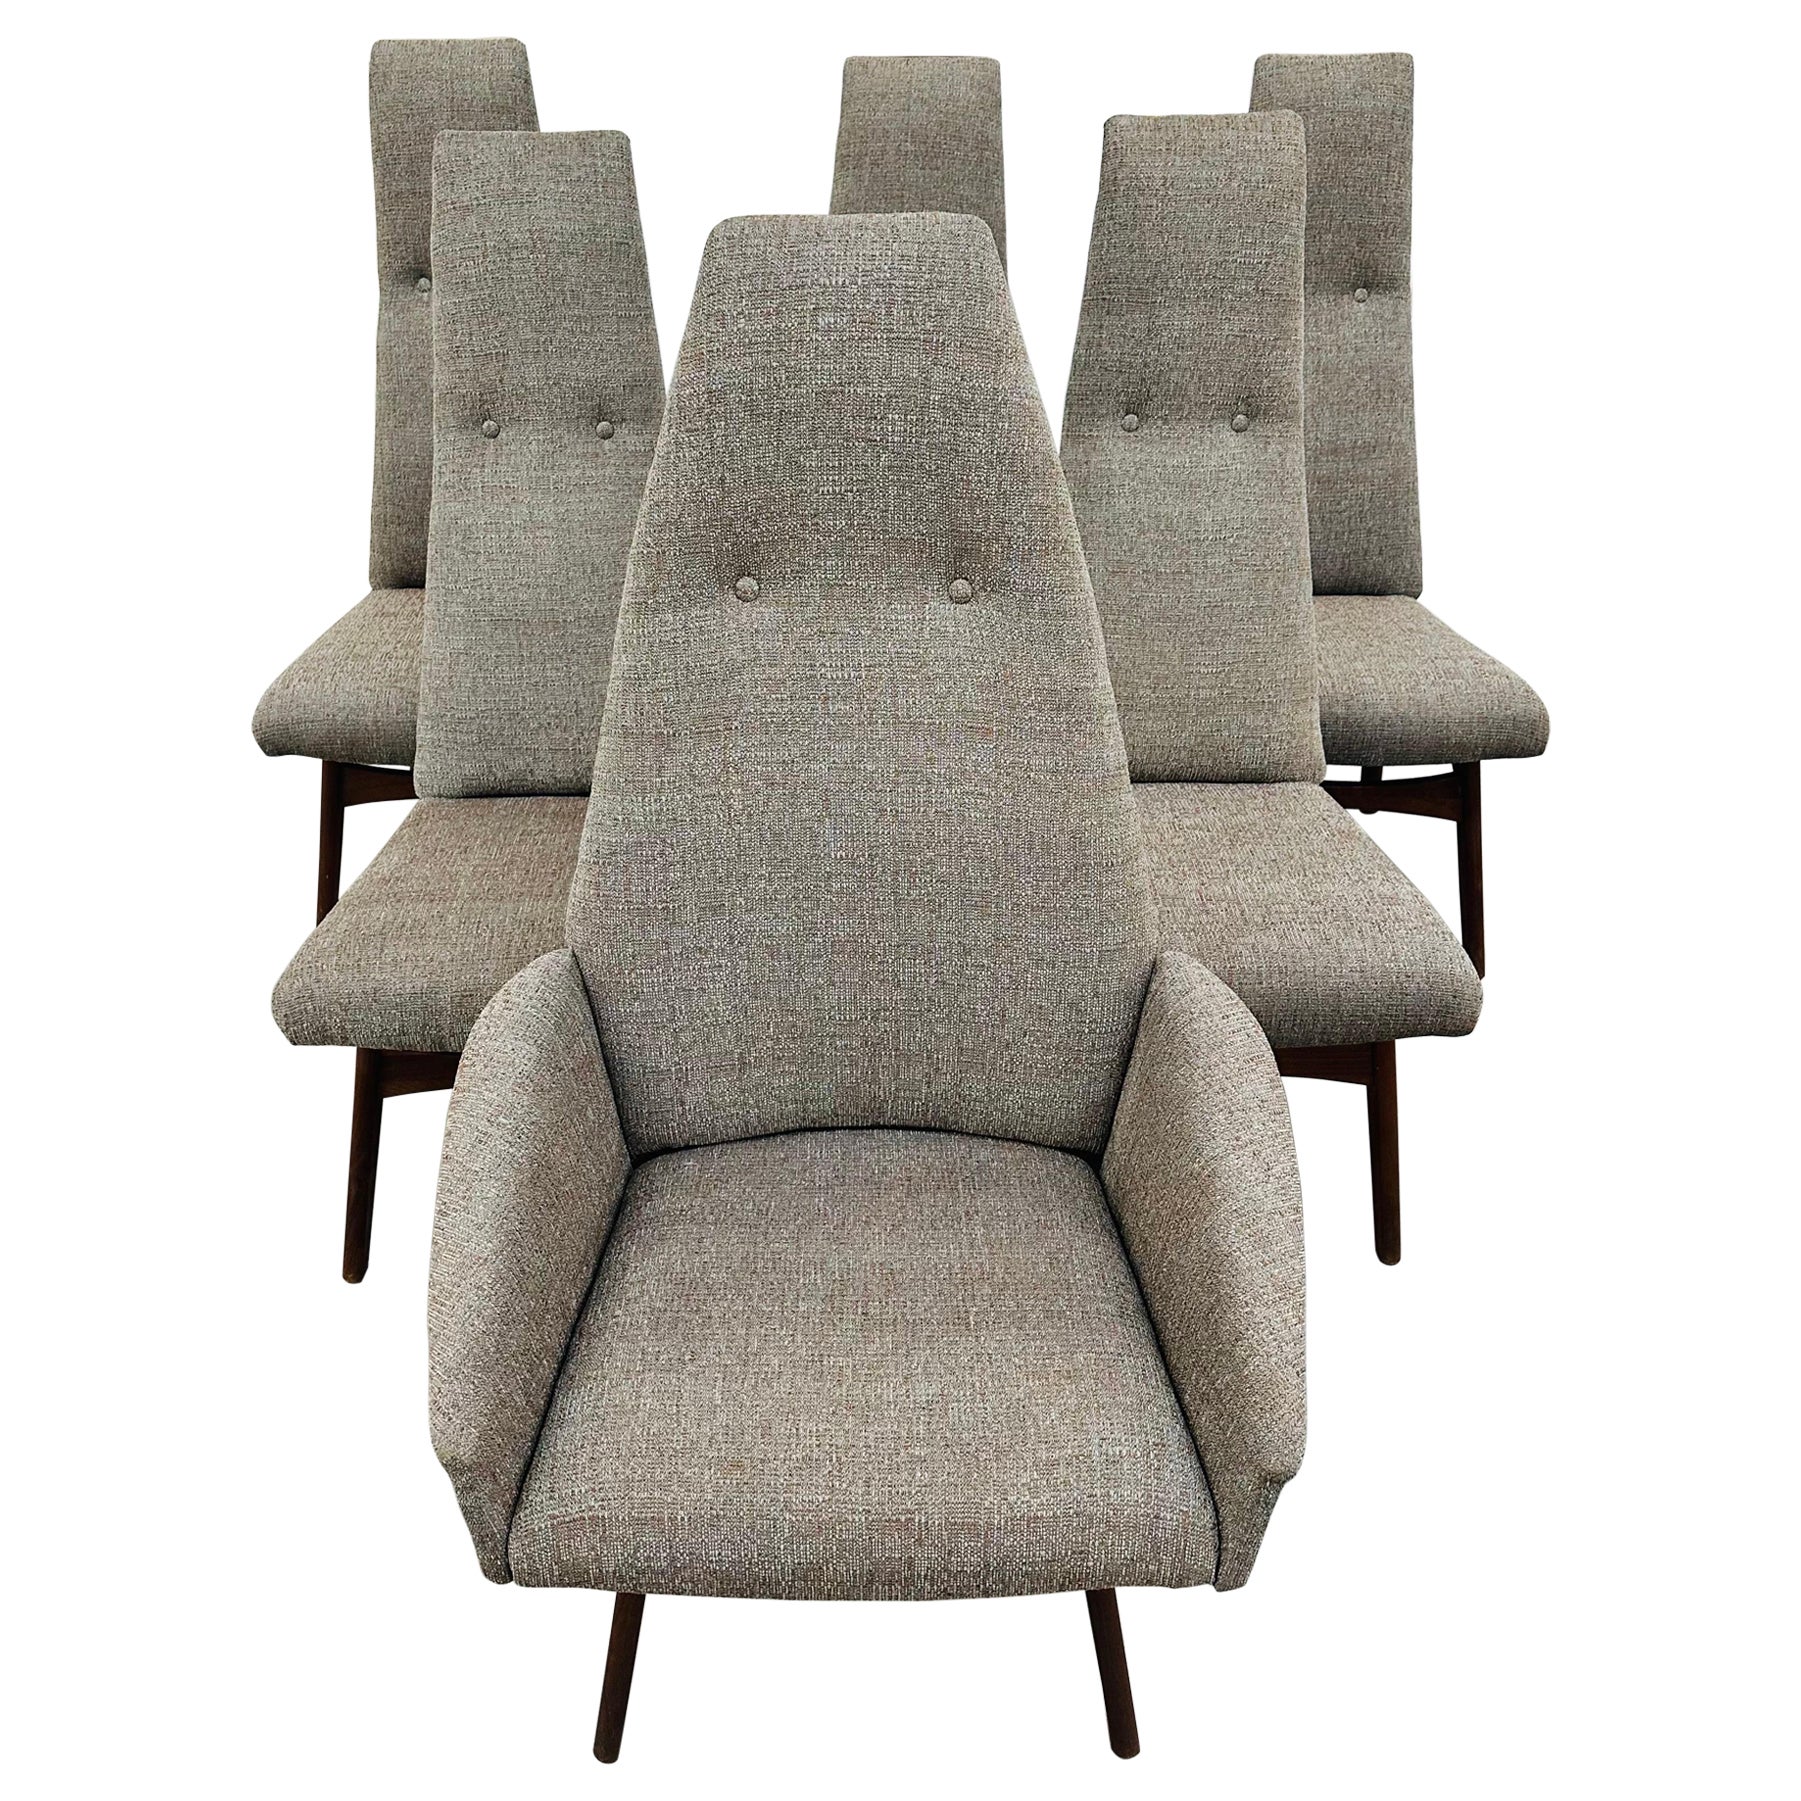 Mid-Century Modern Adrian Pearsall High-Back Dining Chairs - Set of 6 For Sale